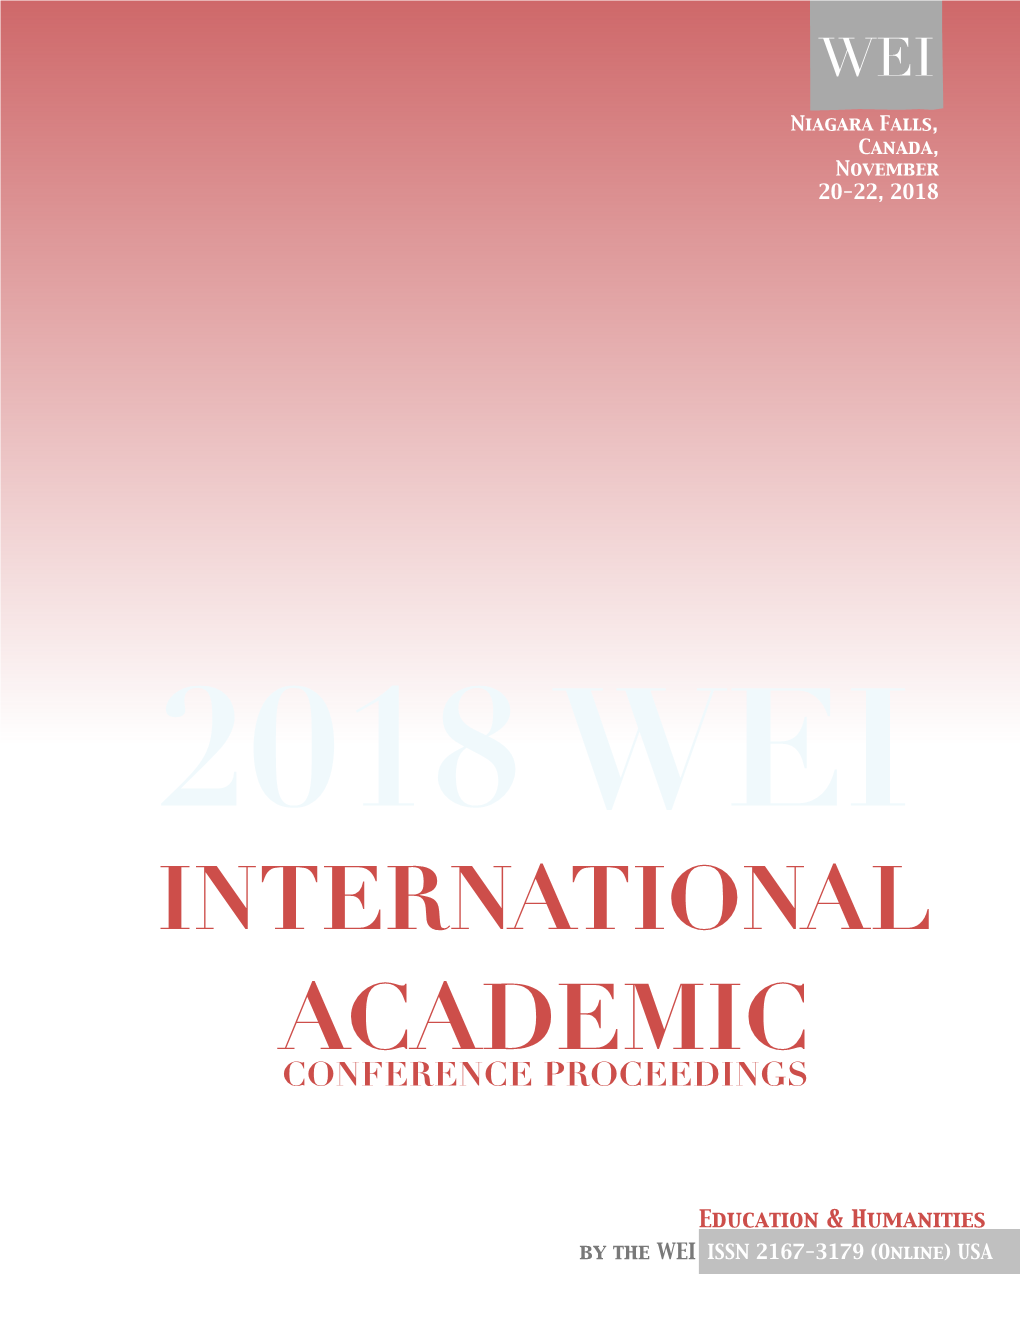 Conference Proceedings for Education And